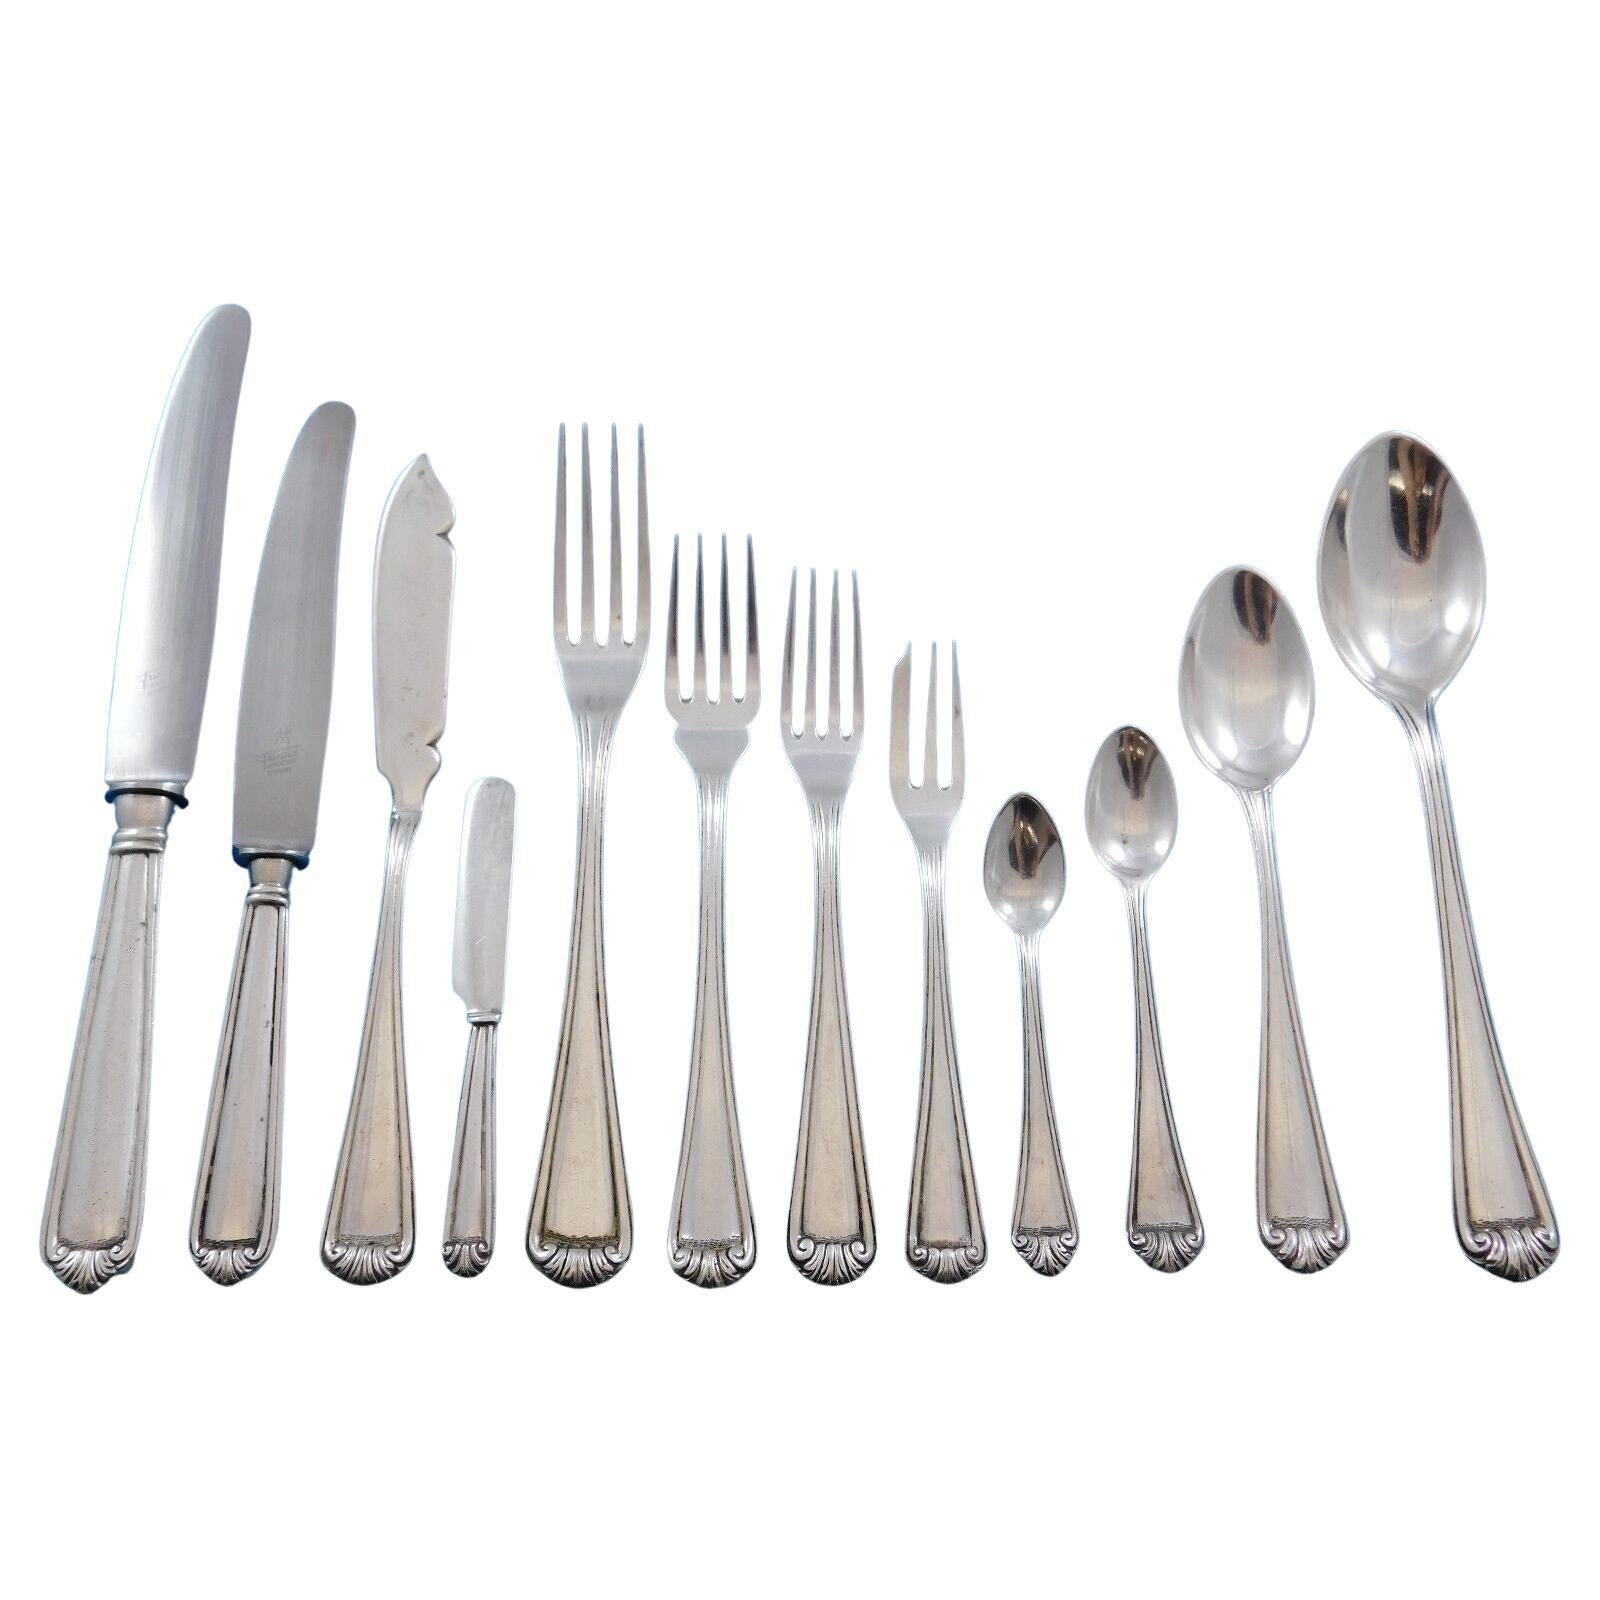 Portugese 833 Silver Flatware Set Service for 12 Scroll Design 150 Pieces Dinner